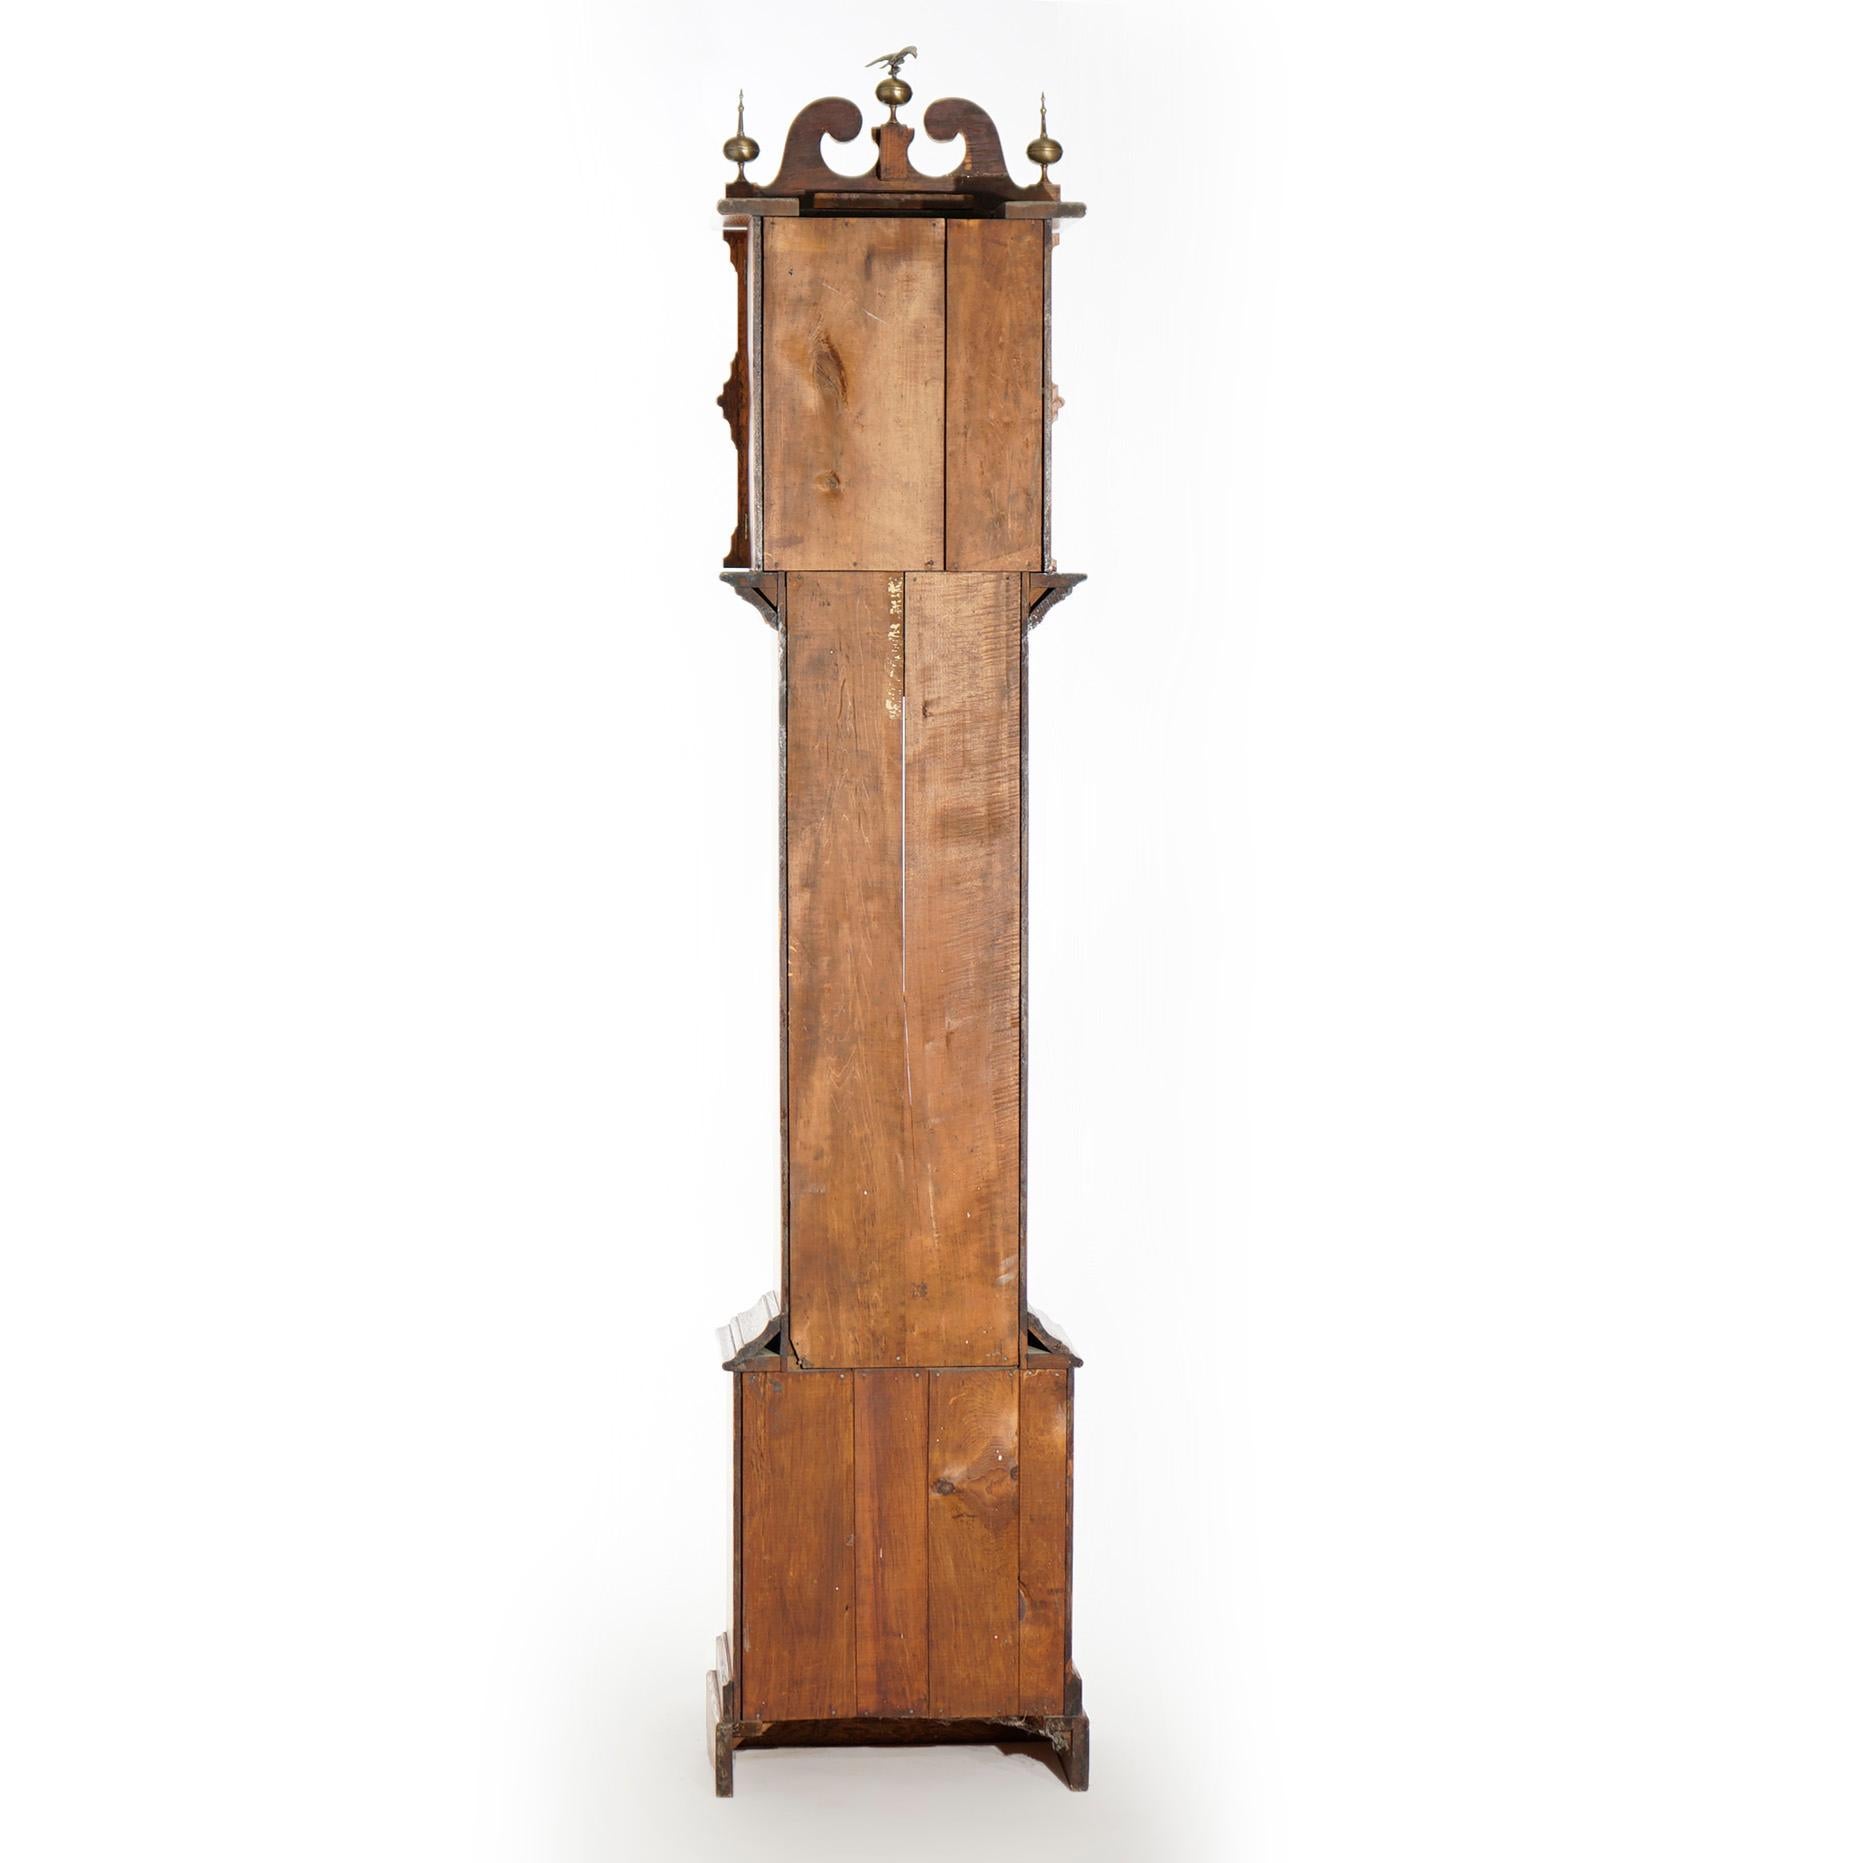 American Antique Federal Style Carved Oak Tall Case Clock by Ithaca, 20th C